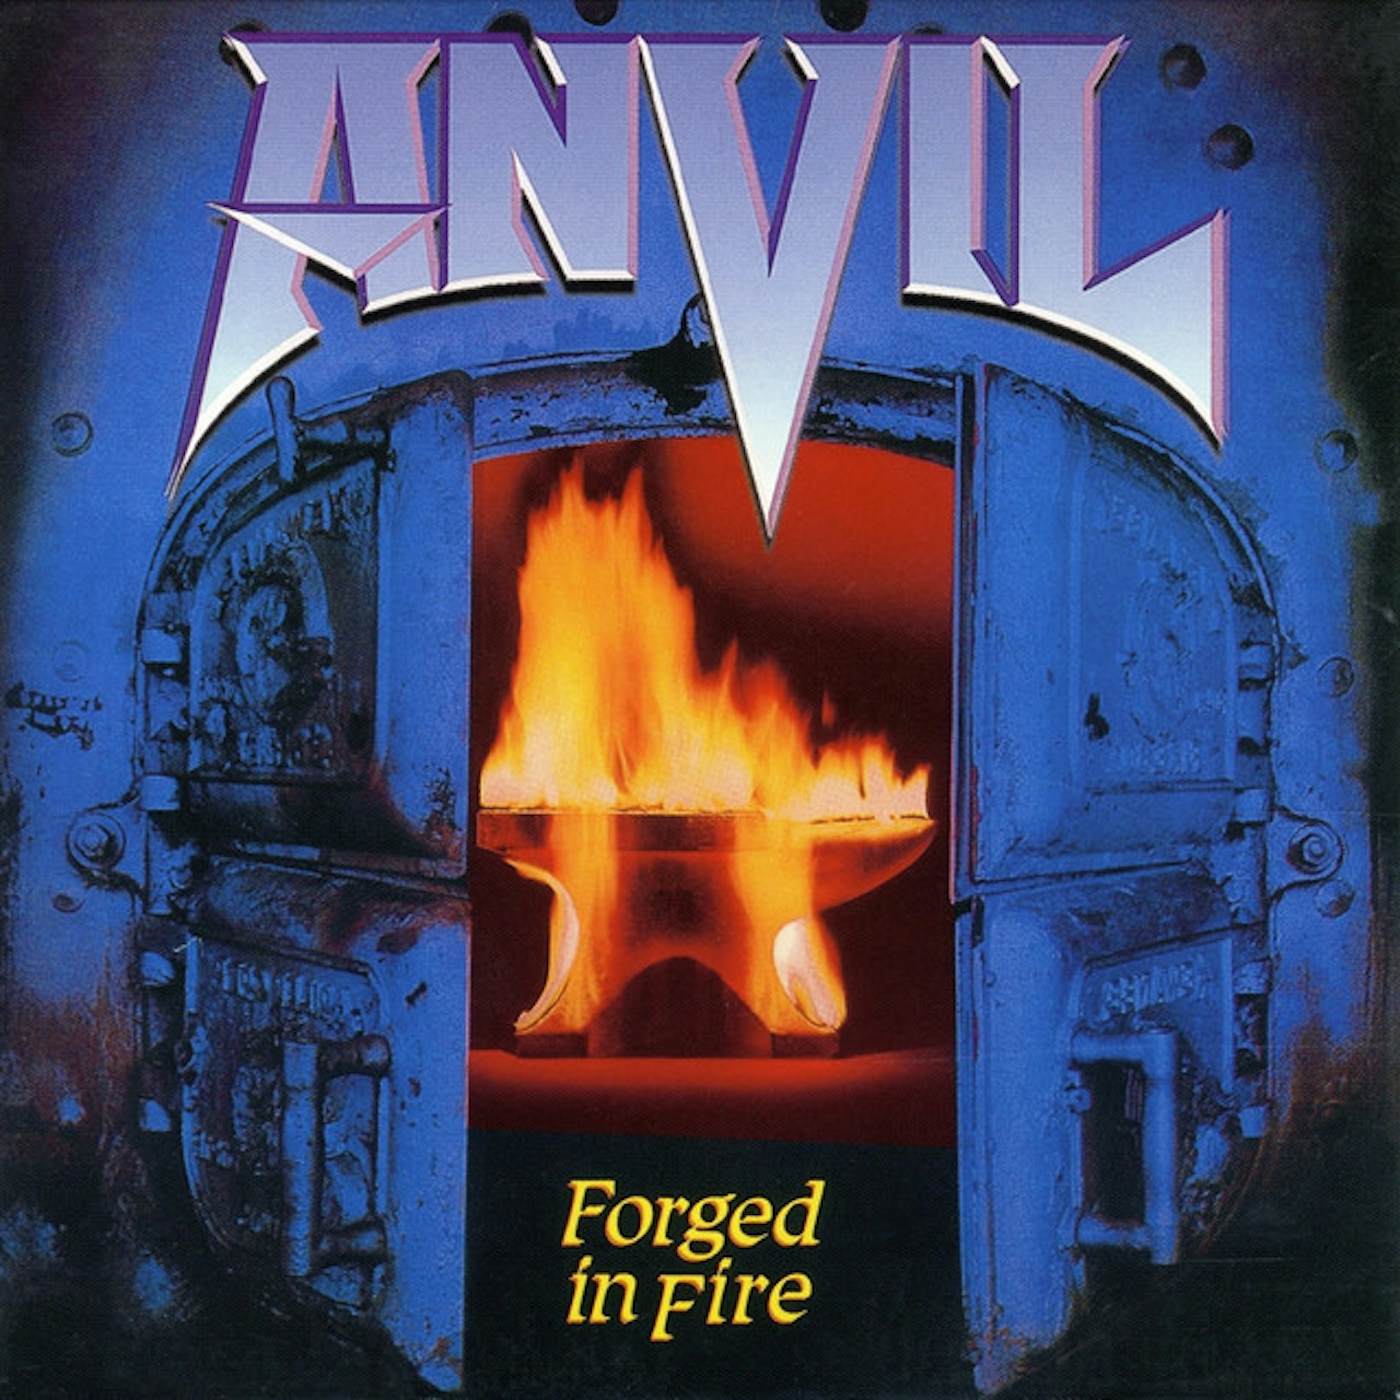 Anvil Forged in Fire Vinyl Record